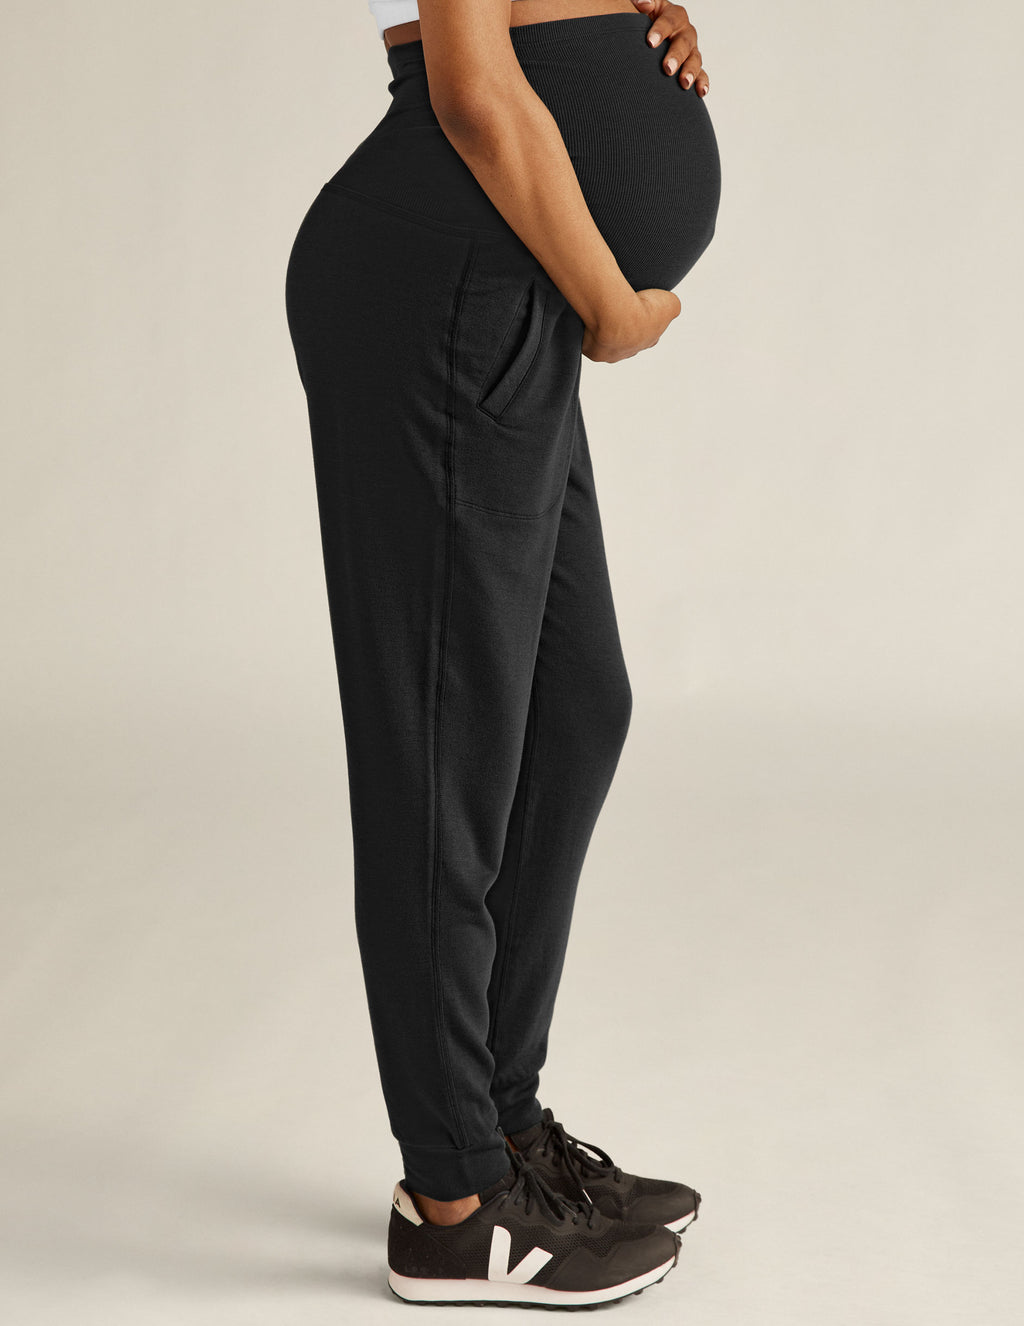 IUGA Fleece Lined Maternity Pants with Pockets Maternity Yoga Pants Flare  Bootcut Pregnancy Pants Over The Belly for Work Lounge Casual Black at   Women's Clothing store